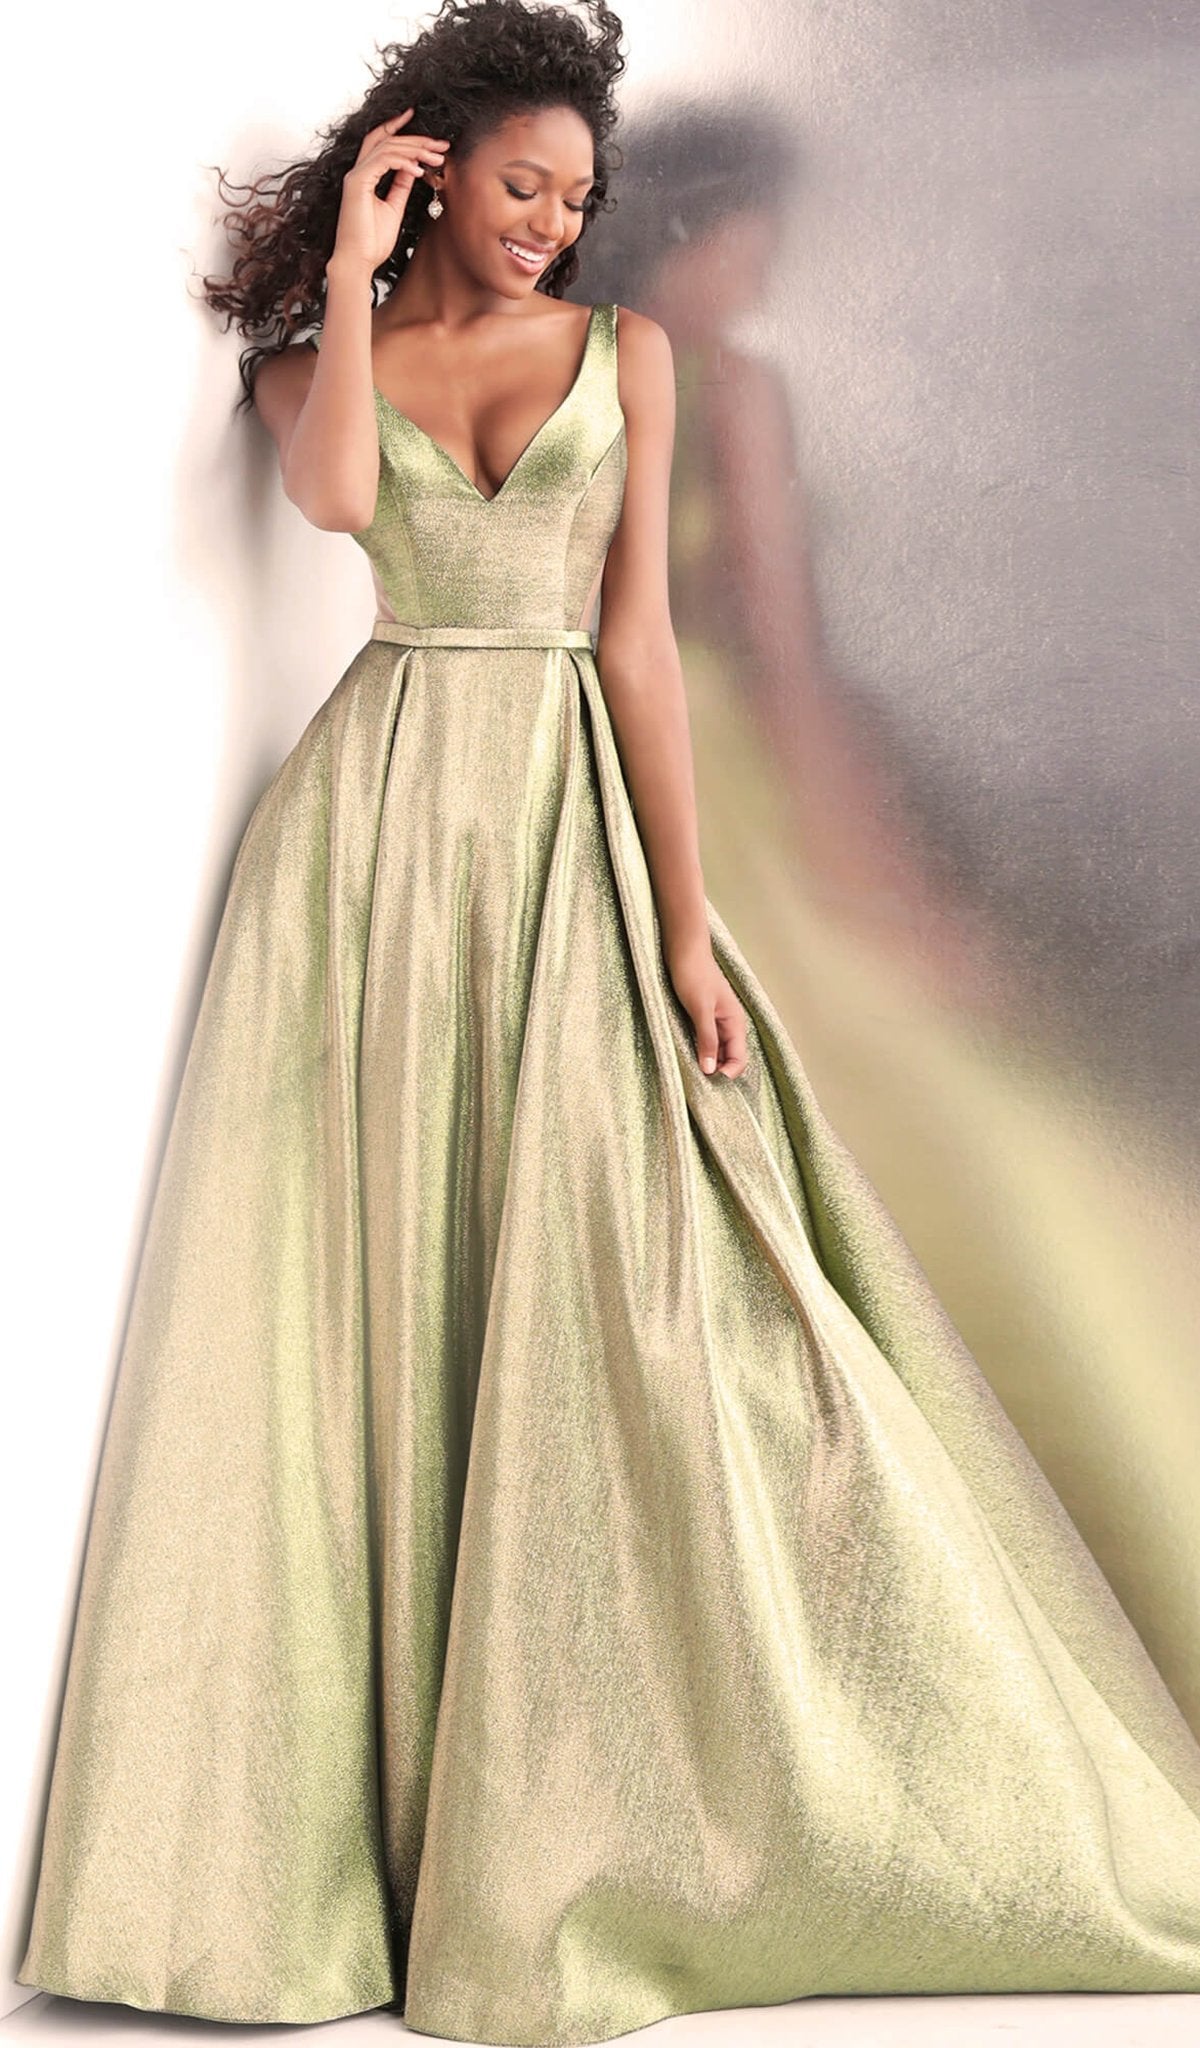 Jovani - JVN67647 Plunging V-Neck Metallic Ballgown in Green and Gold